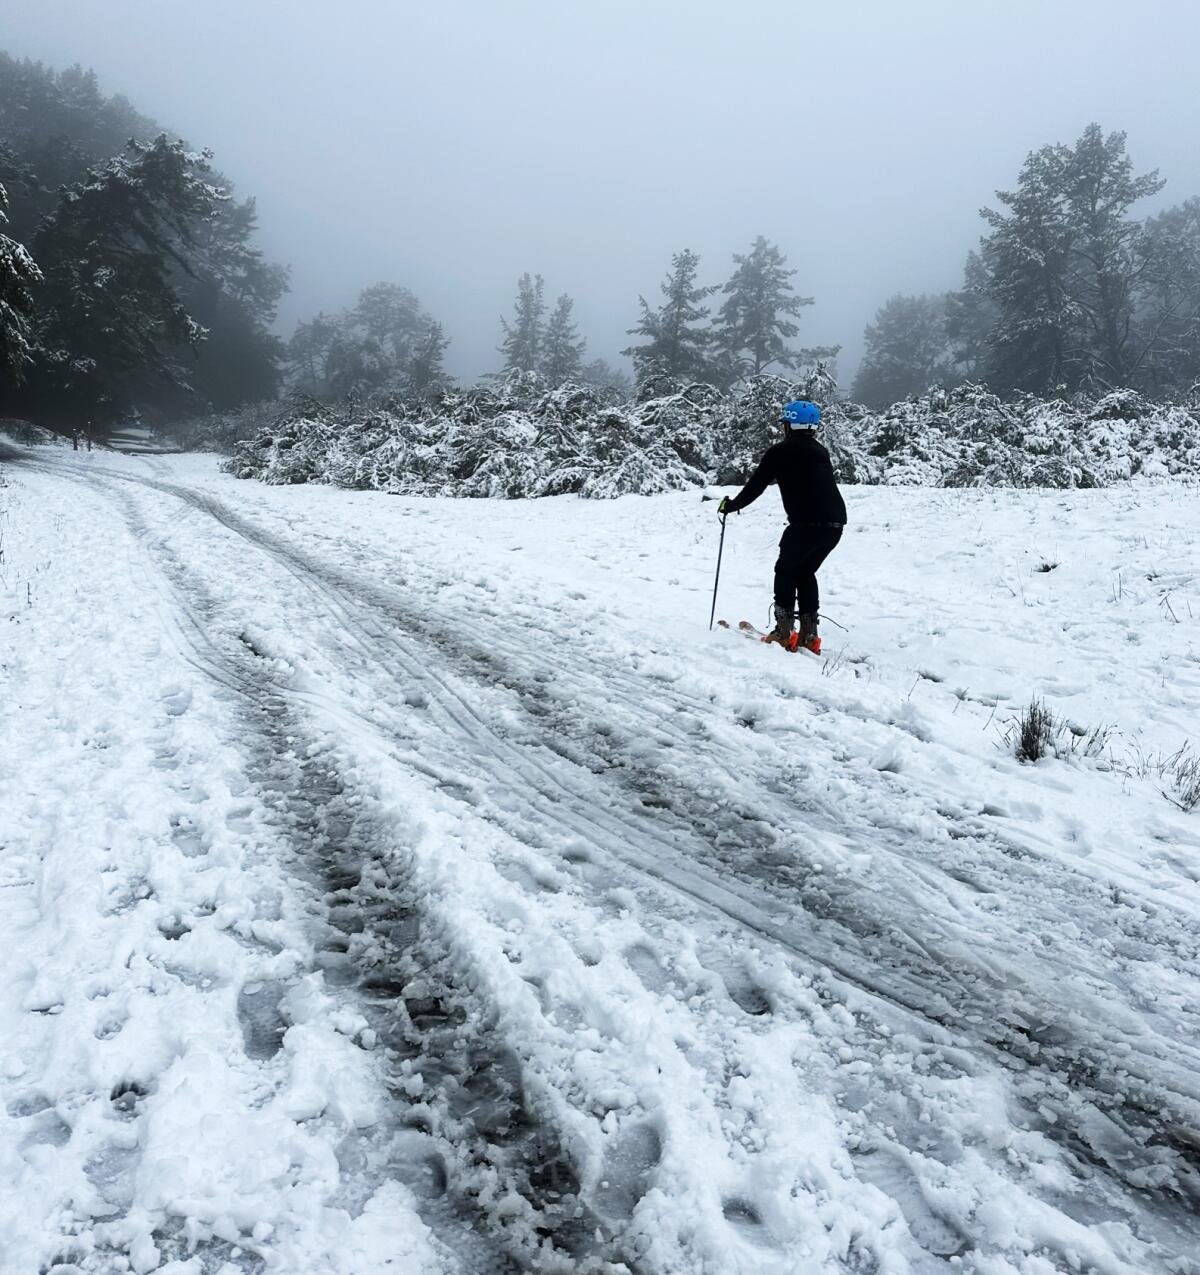 A man on skis stands amid a light coating of snow. Evergreen trees are in the background.